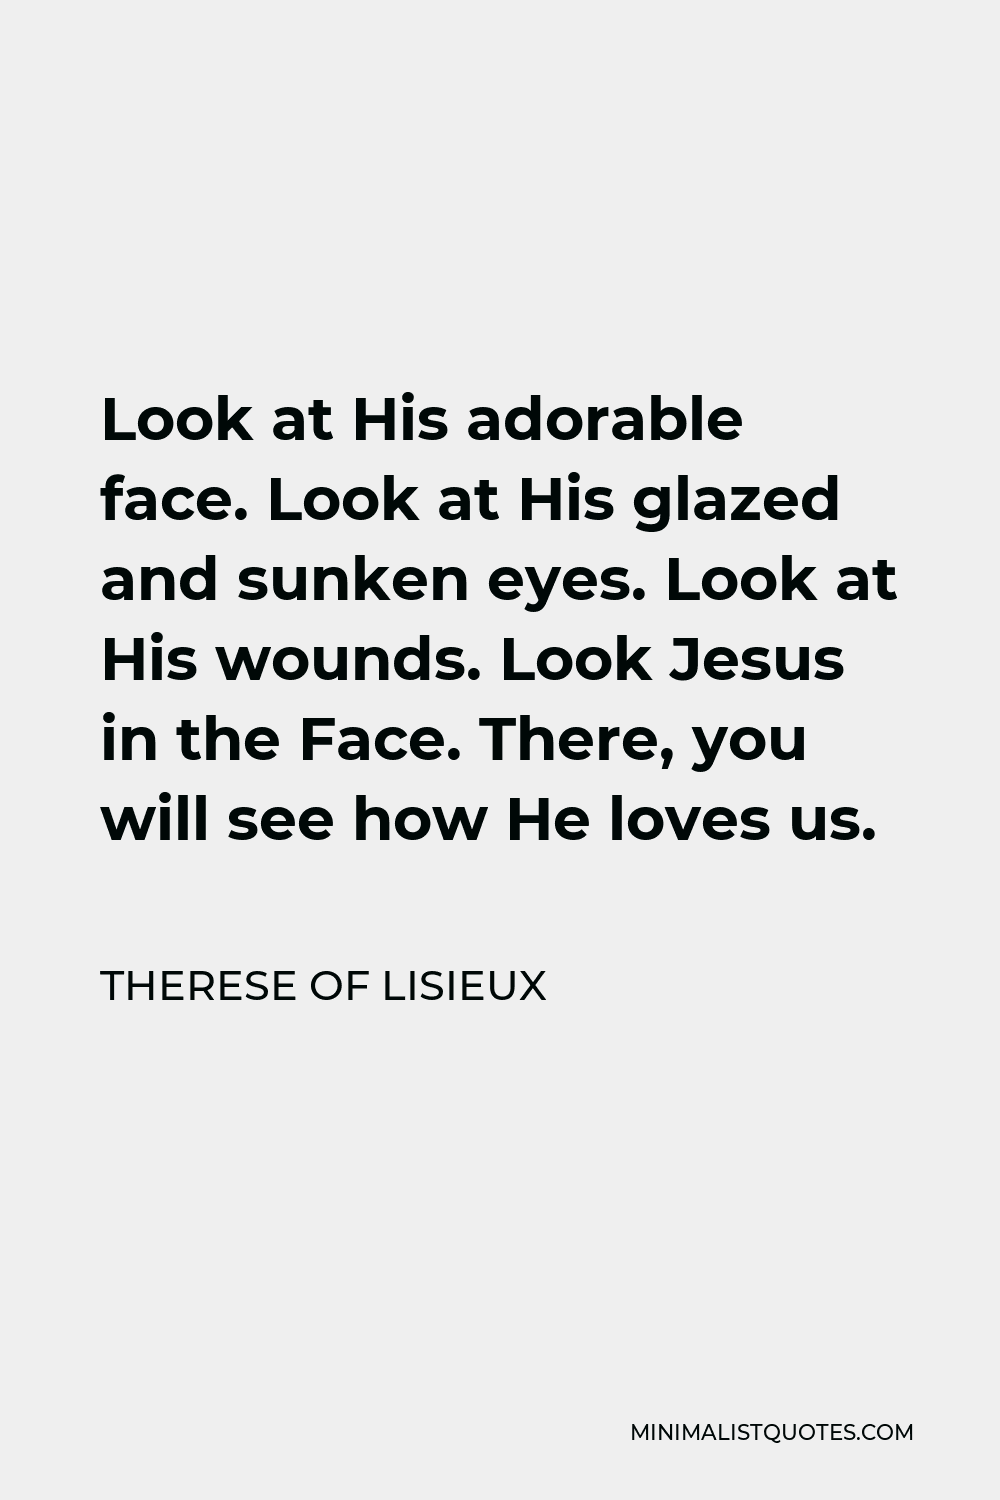 Therese of Lisieux Quote - Look at His adorable face. Look at His glazed and sunken eyes. Look at His wounds. Look Jesus in the Face. There, you will see how He loves us.